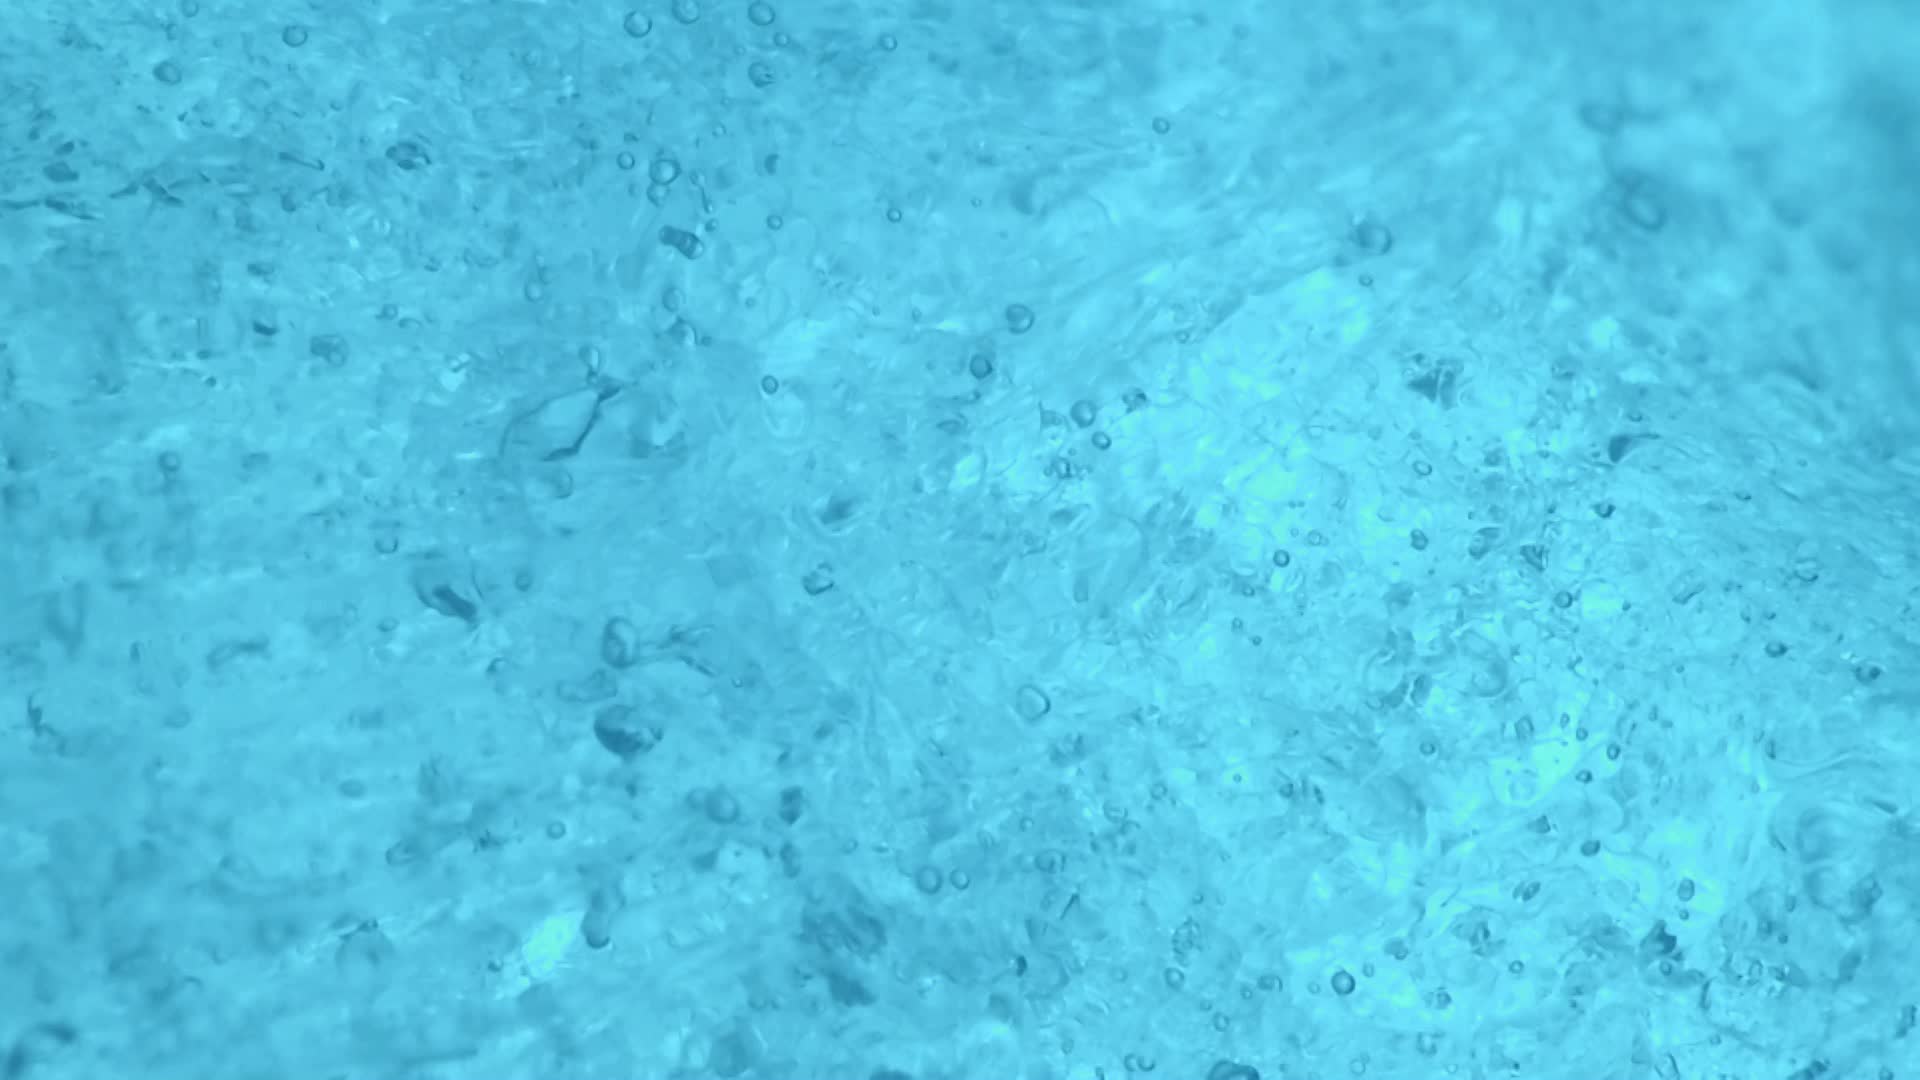 Melting Ice Cyan Background Timelapse With Bubbles Stock Footage